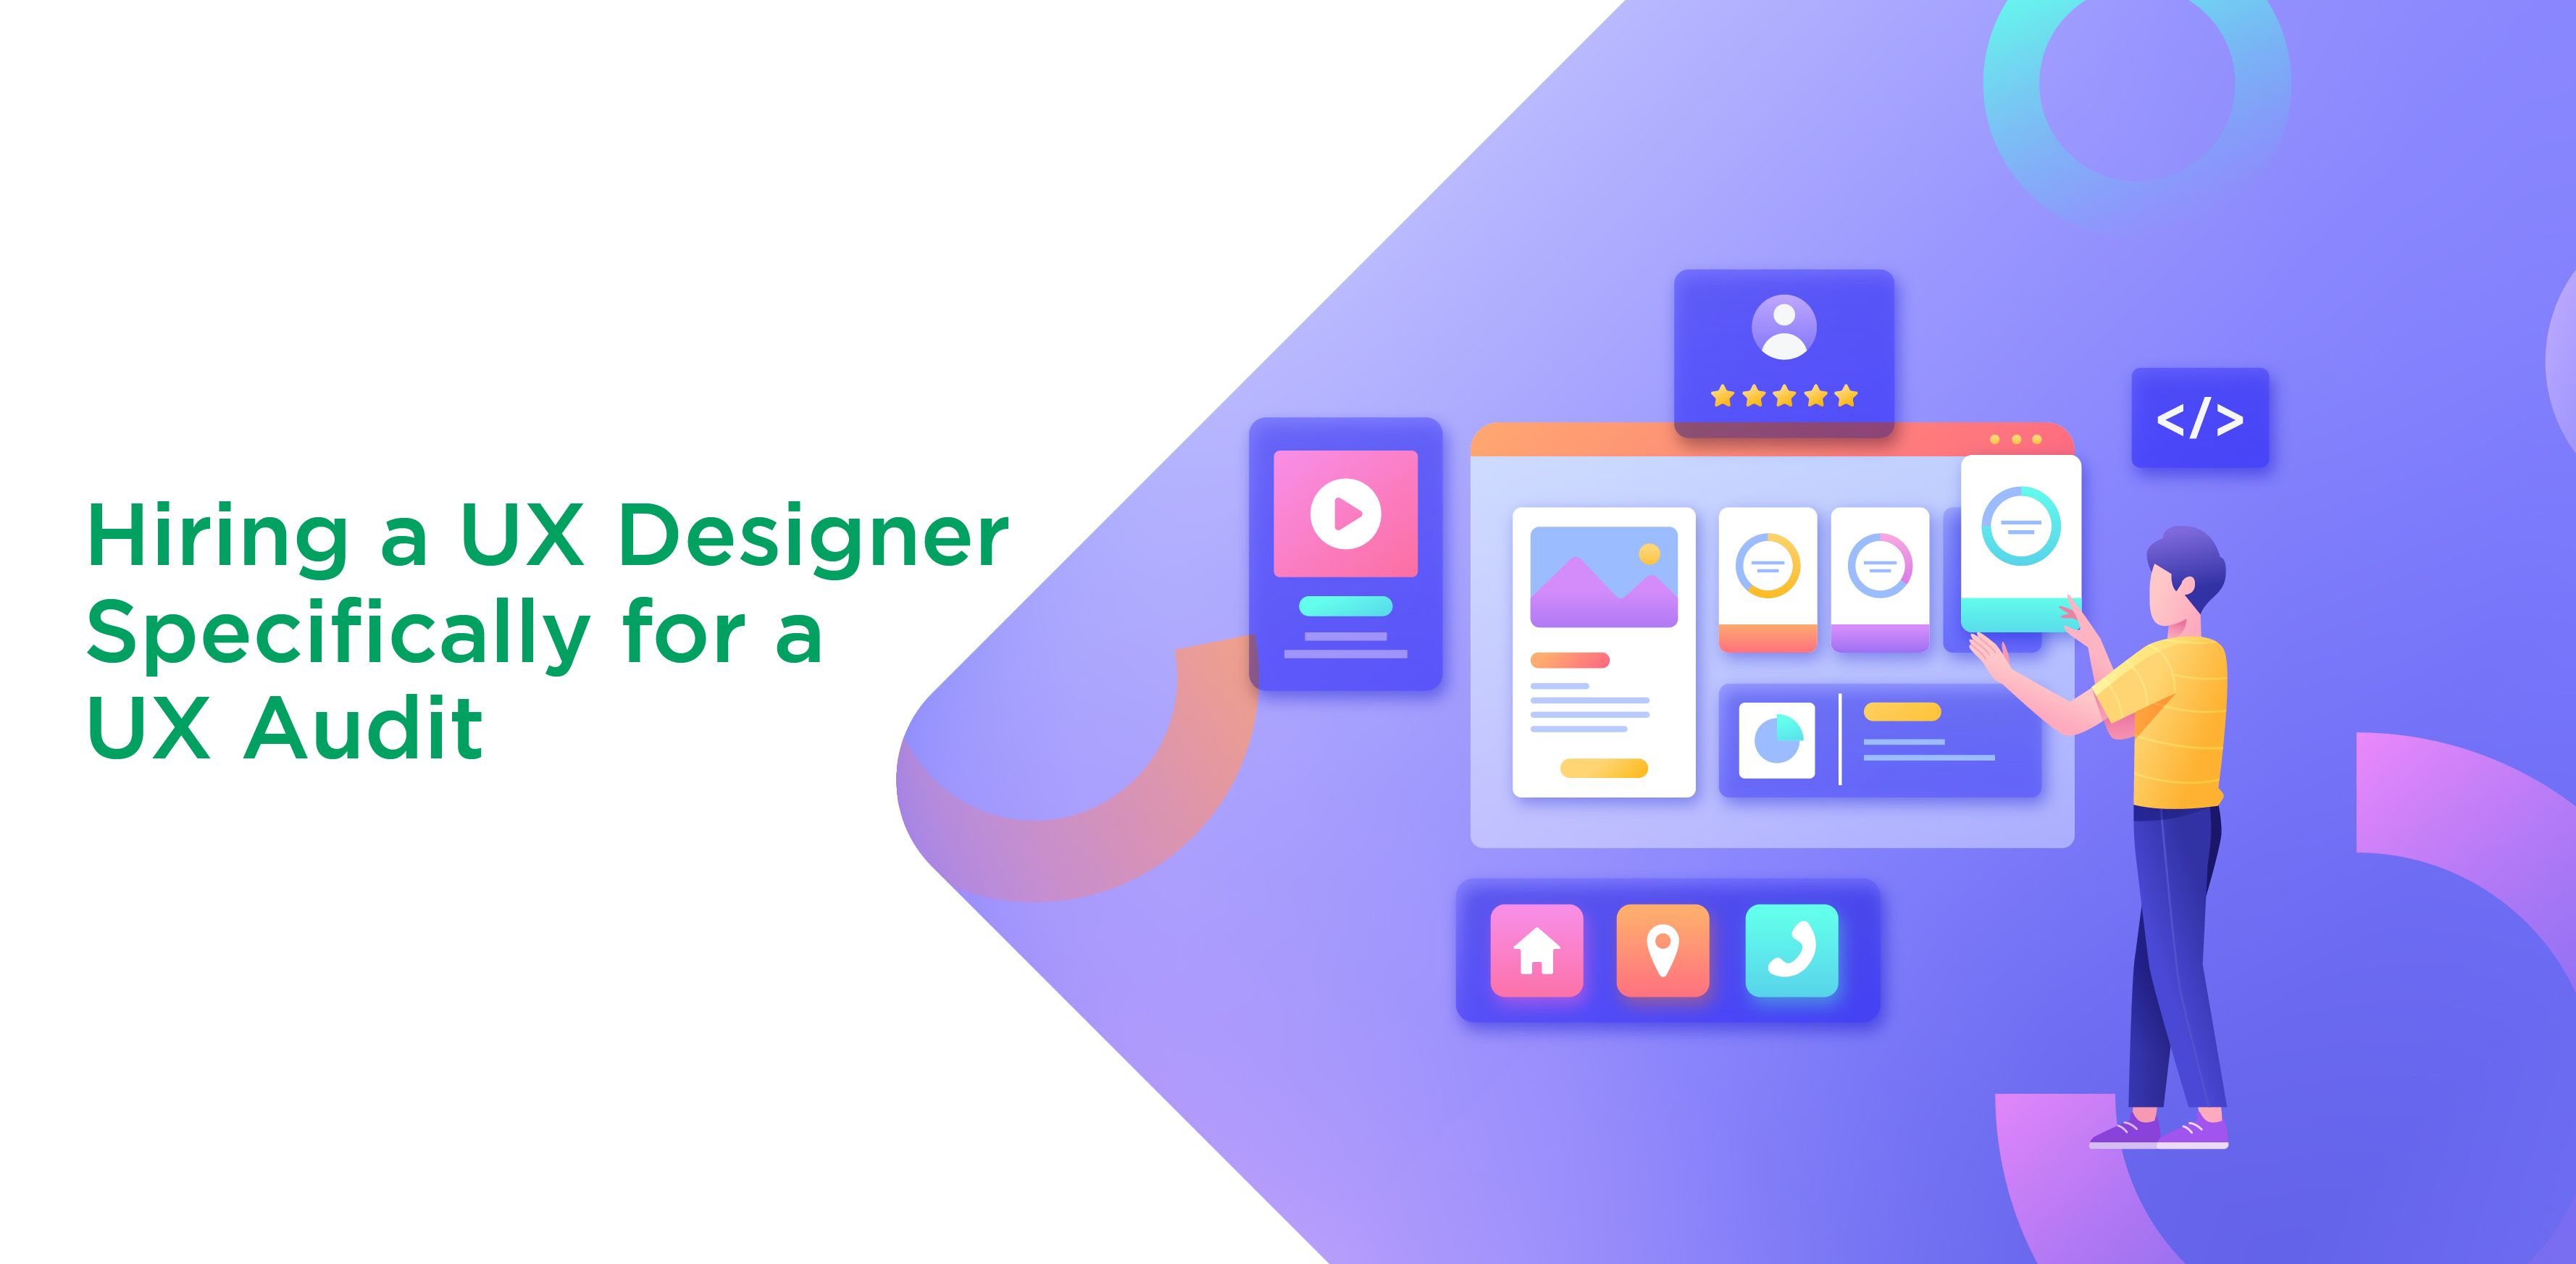 Hiring a UX Designer Specifically for a UX Audit